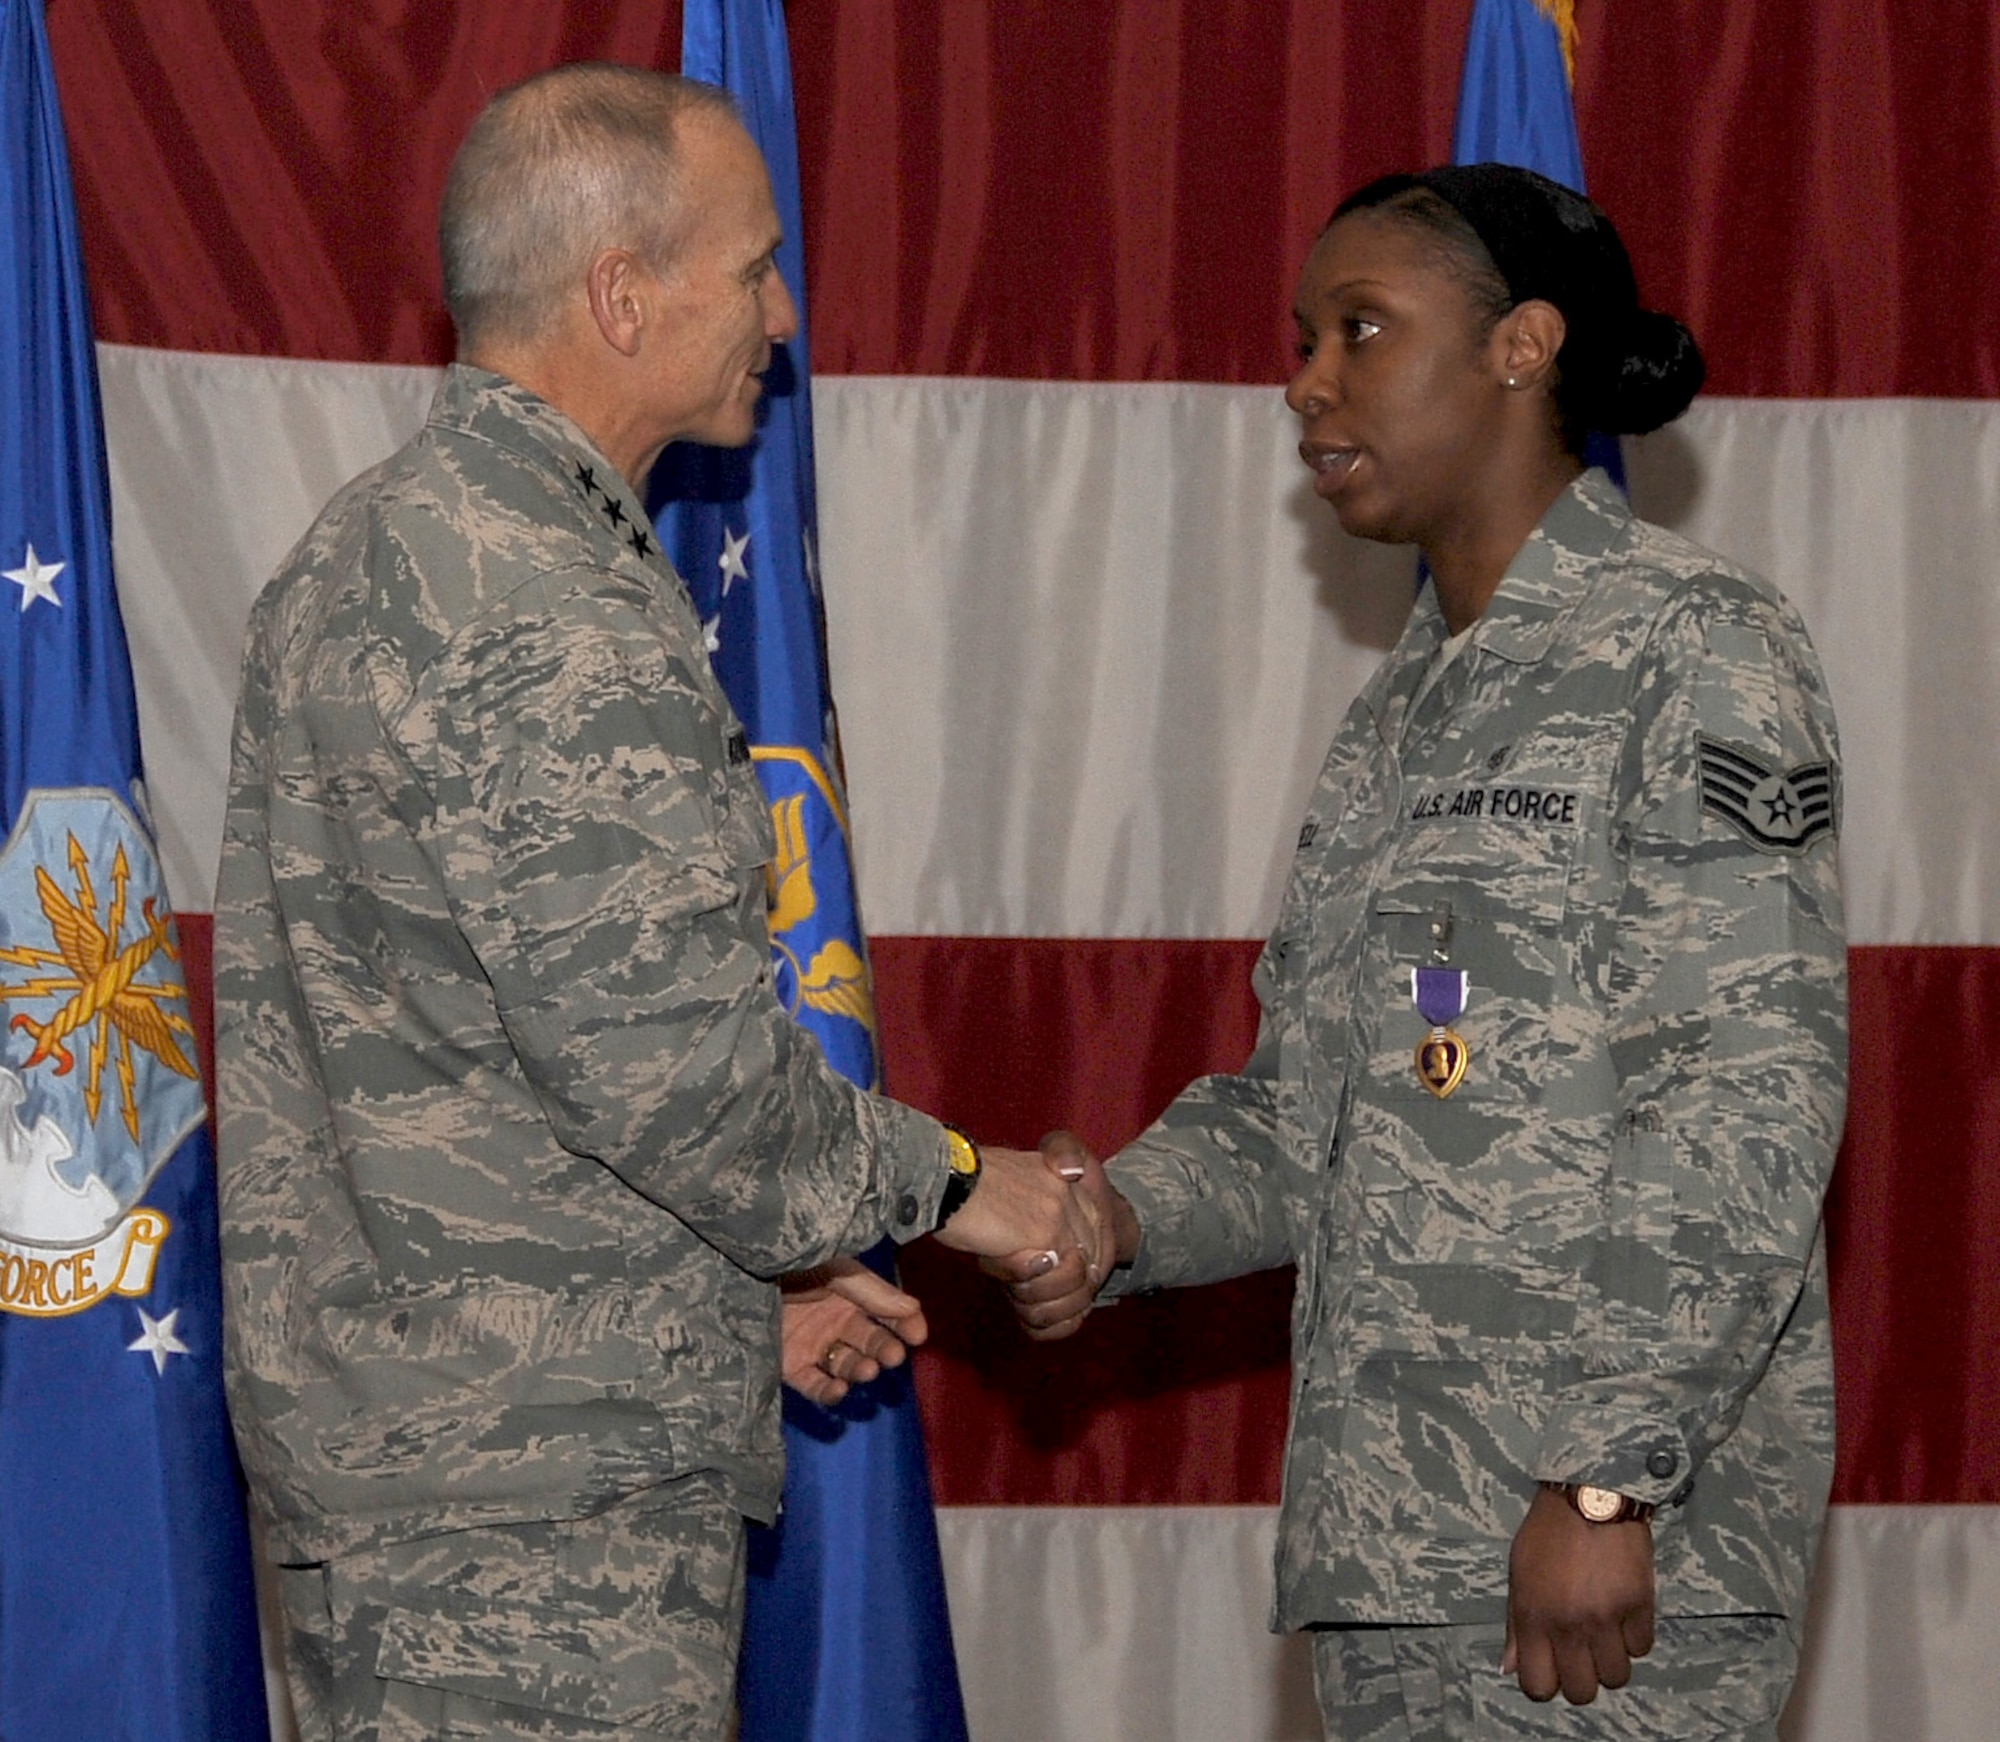 Lt. Gen. James Kowalski, Air Force Global Strike Command commander, shakes the hand of Staff Sgt. Jasmine Russell, 2nd Medical Operations Squadron, after presenting her with the Purple Heart during a ceremony at Hoban Hall on Barksdale Air Force Base, La., Feb. 7. Russell earned the Purple Heart after her deployment to Afghanistan in 2011 during Operation Enduring Freedom. After an improvised explosive device detonated under the vehicle she was traveling in, Russell aided members in her convoy even after sustaining injuries herself. (U.S. Air Force photo/Staff Sgt. Amber Ashcraft)